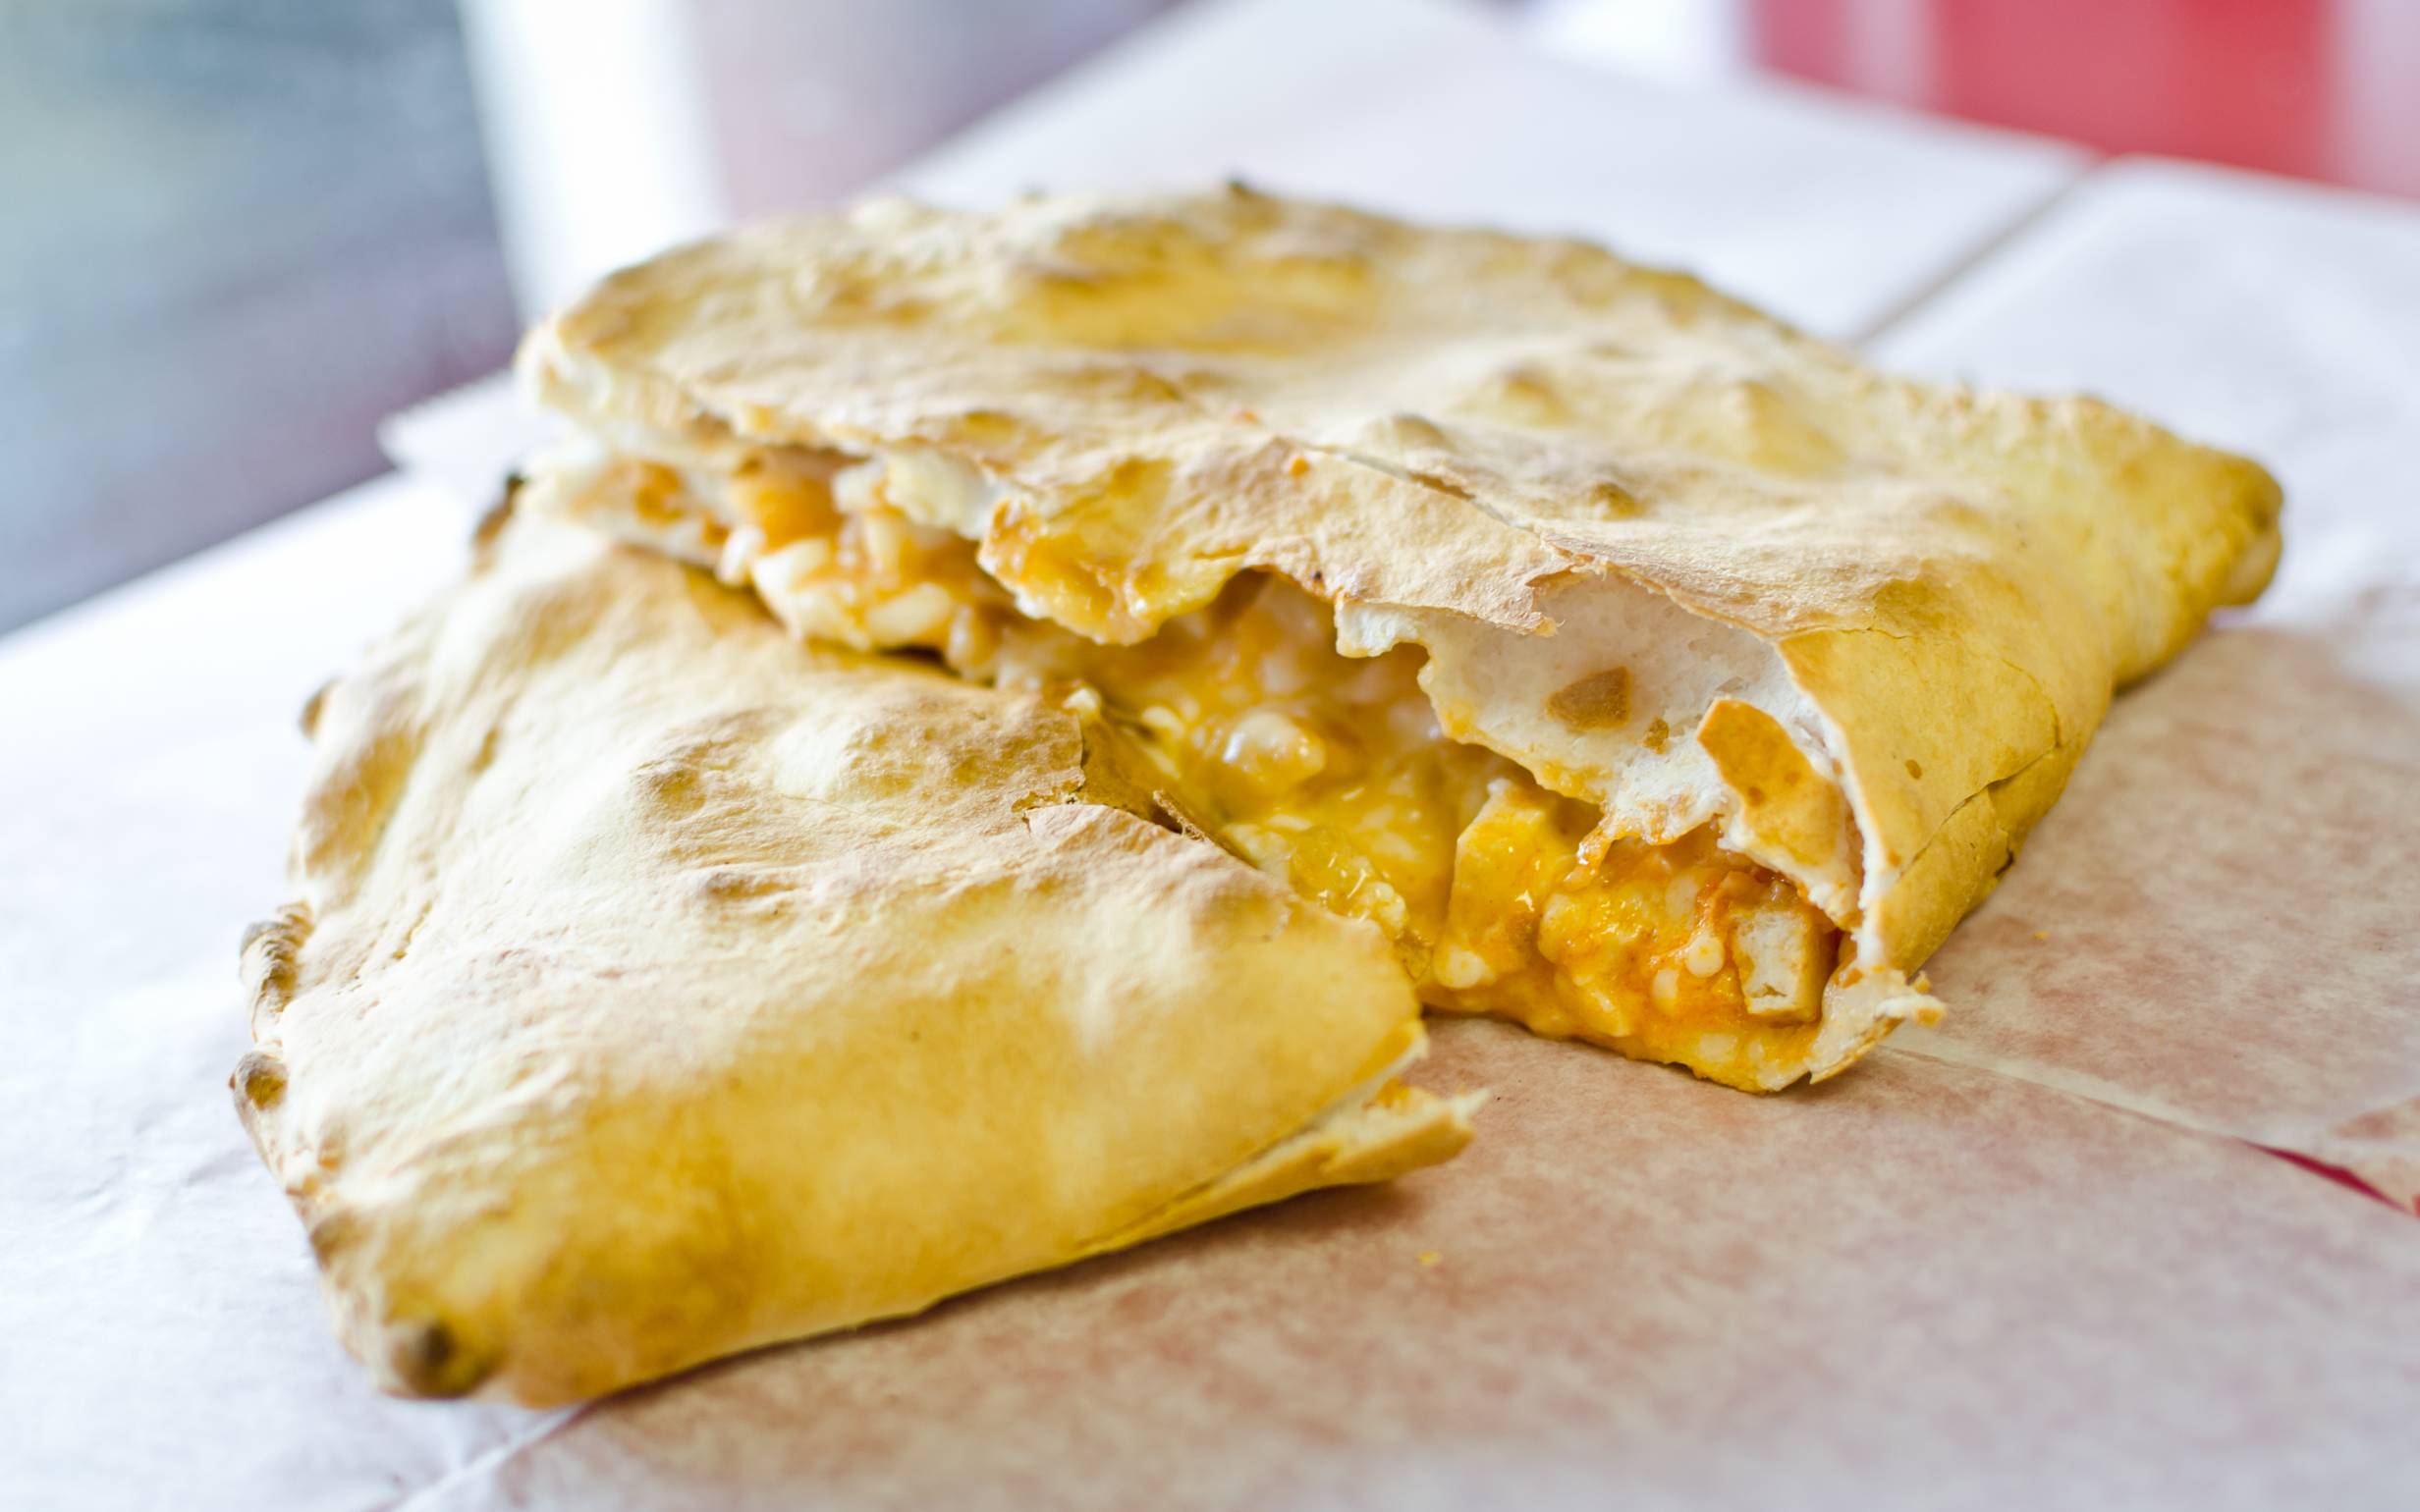 A calzone from D.P. Dough is sliced in half and stacked slightly on top of each other to showcase the warm, melty inside. Photo by D.P. Dough.